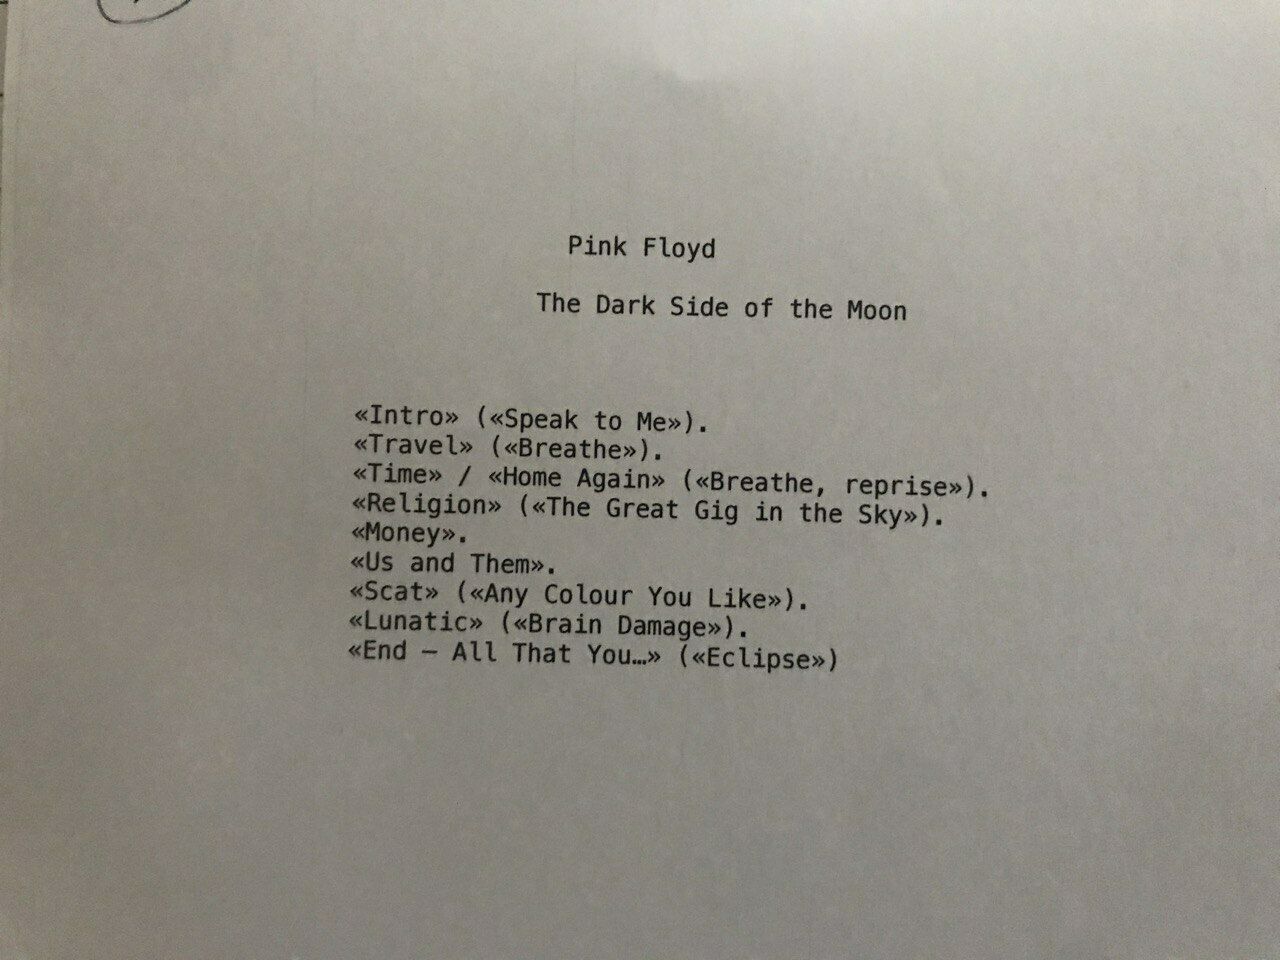  Pink Floyd The Dark Side of The Moon Copy Master Tape 15ips  Reel to Reel - auction details